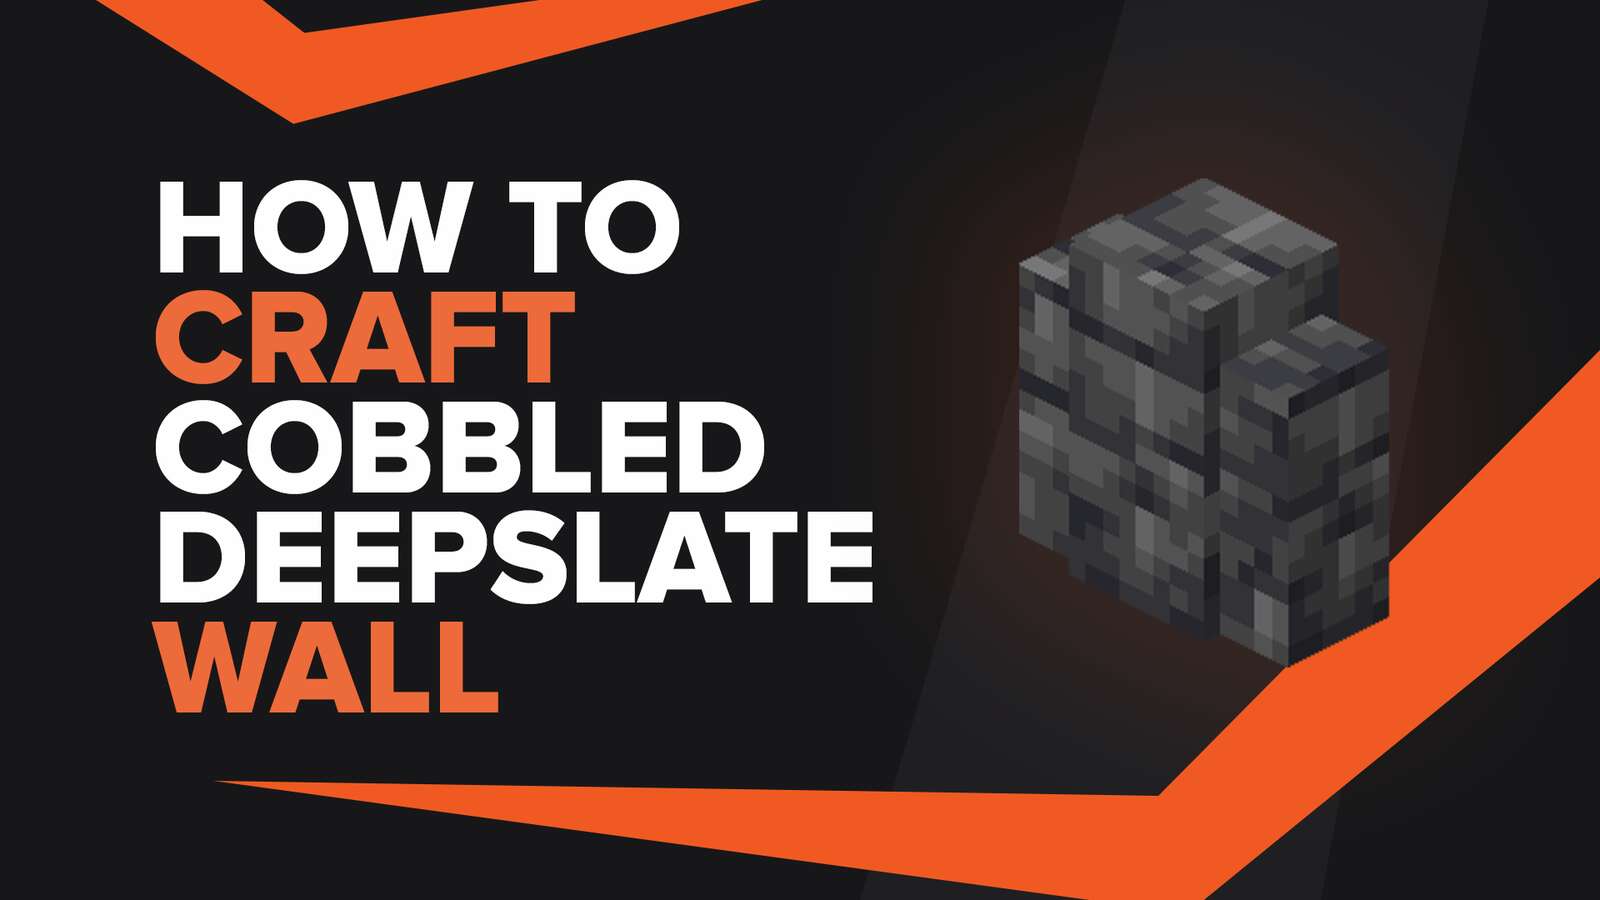 How To Make Cobbled Deepslate Wall In Minecraft